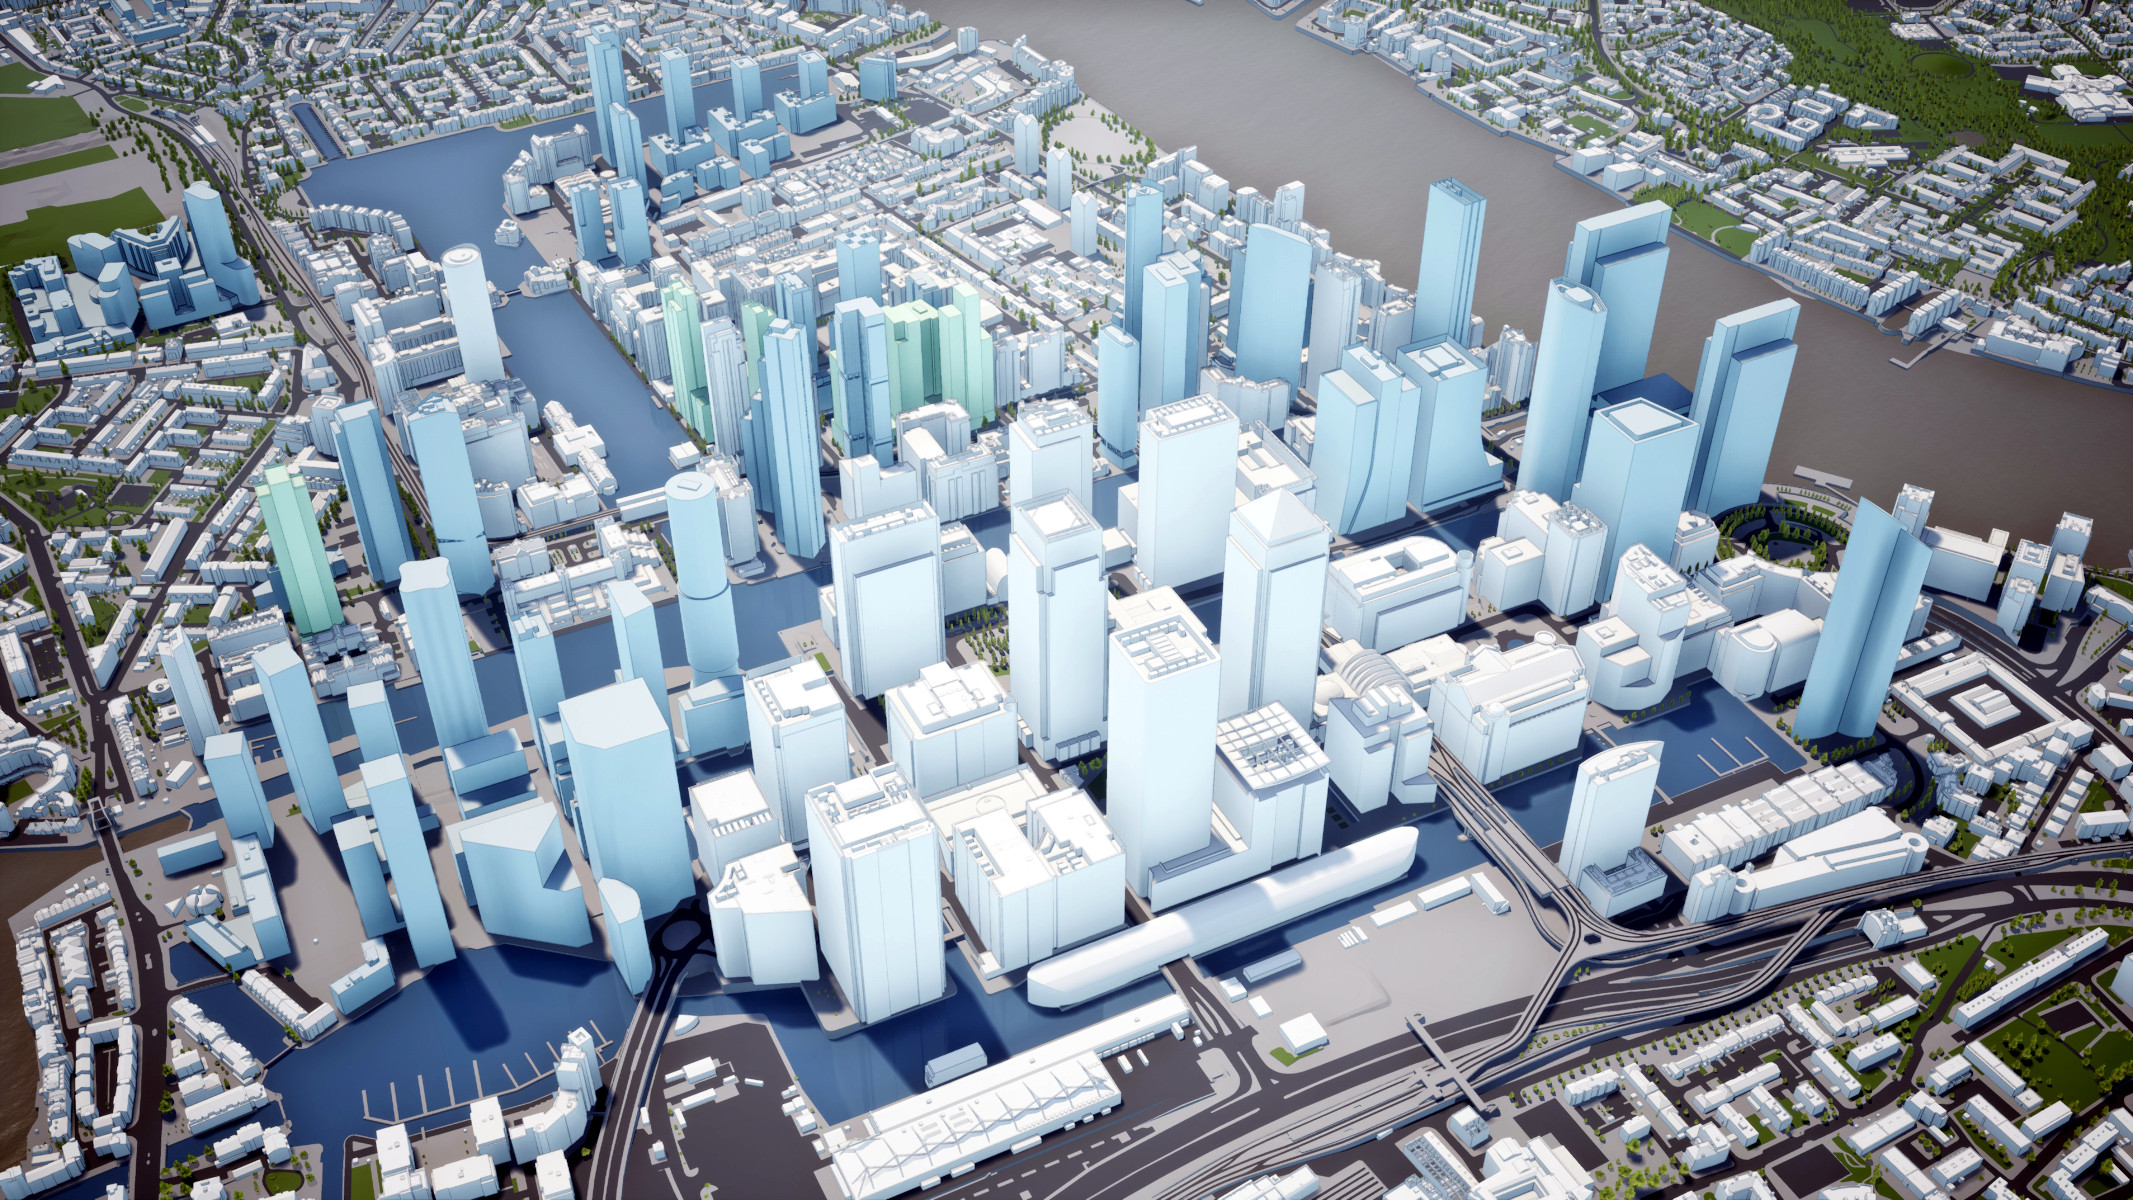 3D Model of London and 3D City Models by AccuCities.jpg